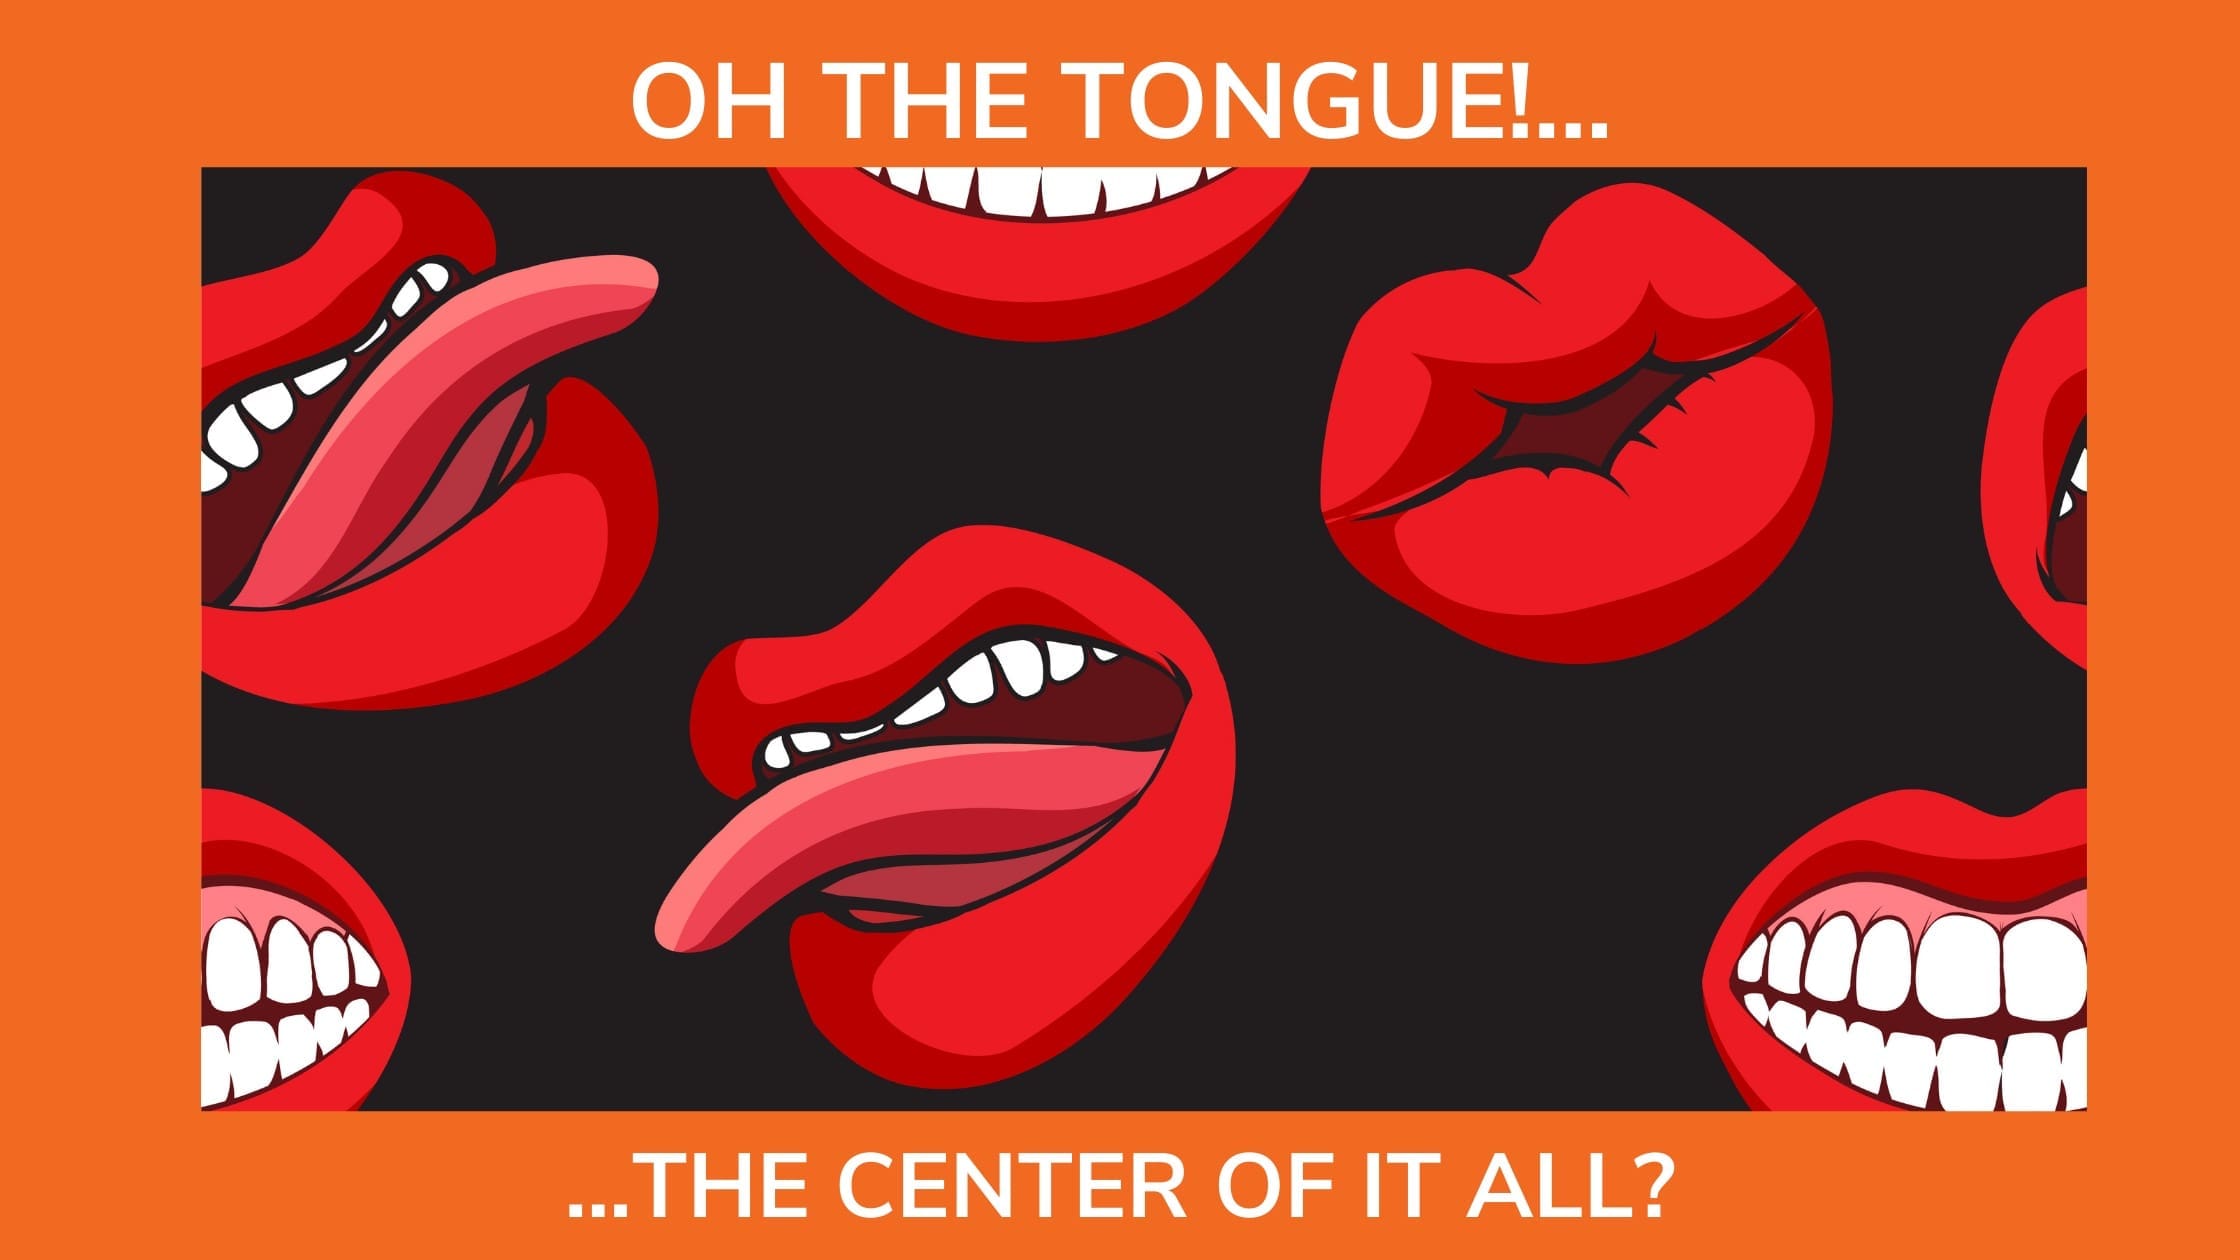 Illustrations of huge mouths feature large lips and tongues represent this blog article's title of "Oh the tongue - the center of it all for singers".